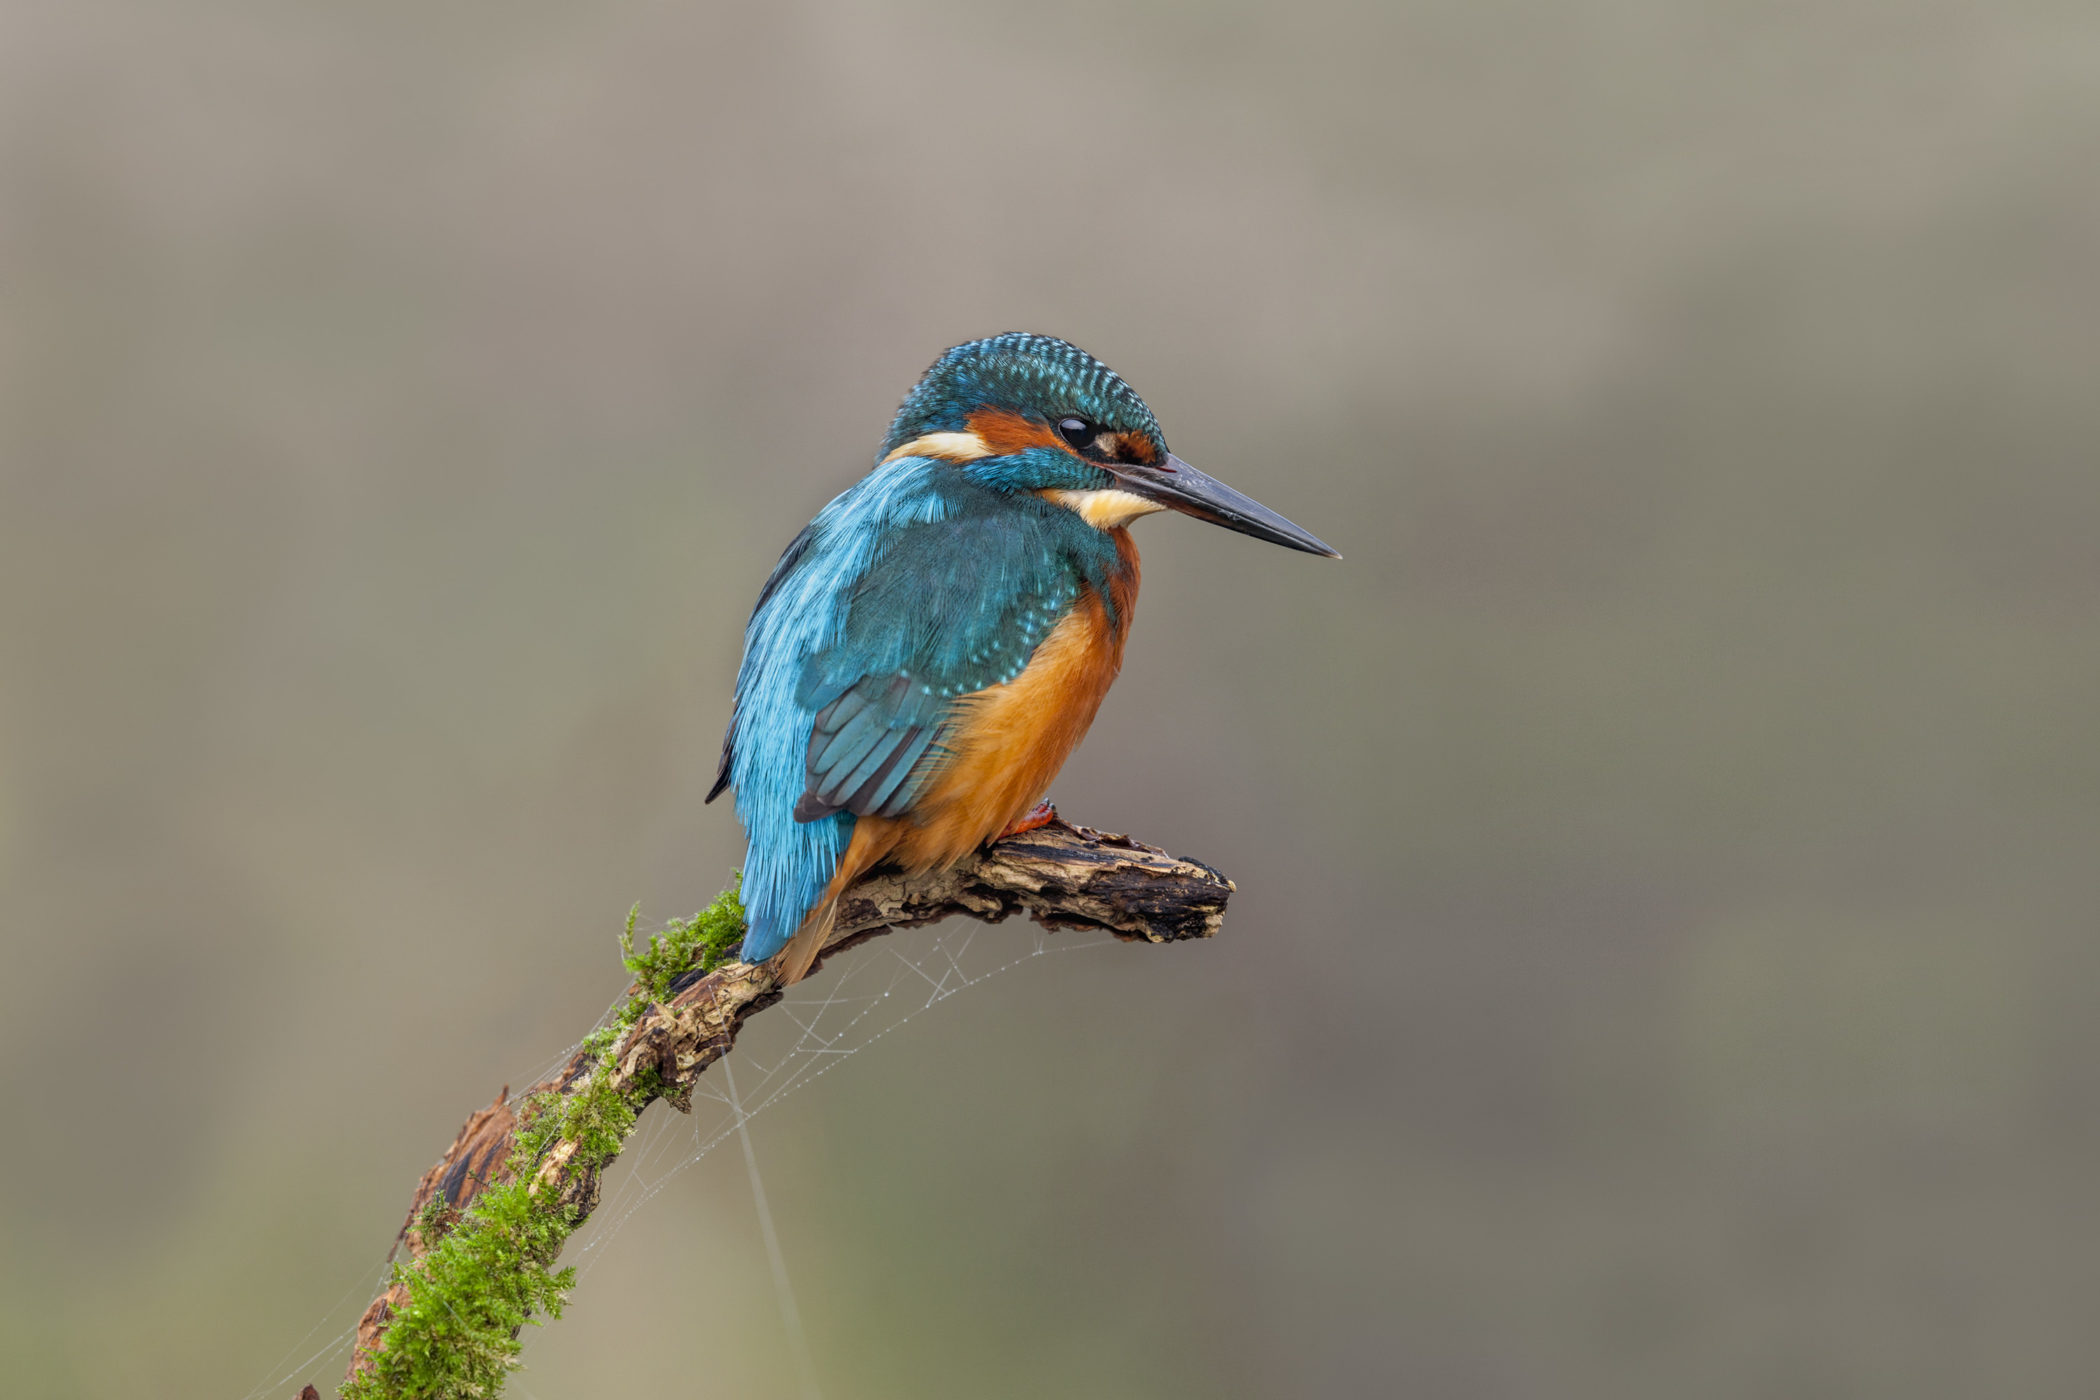 Kingfishers can be seen around the Hayle Estuary throughout the year though they are most common from late summer through the winter. Credit: David Chapman